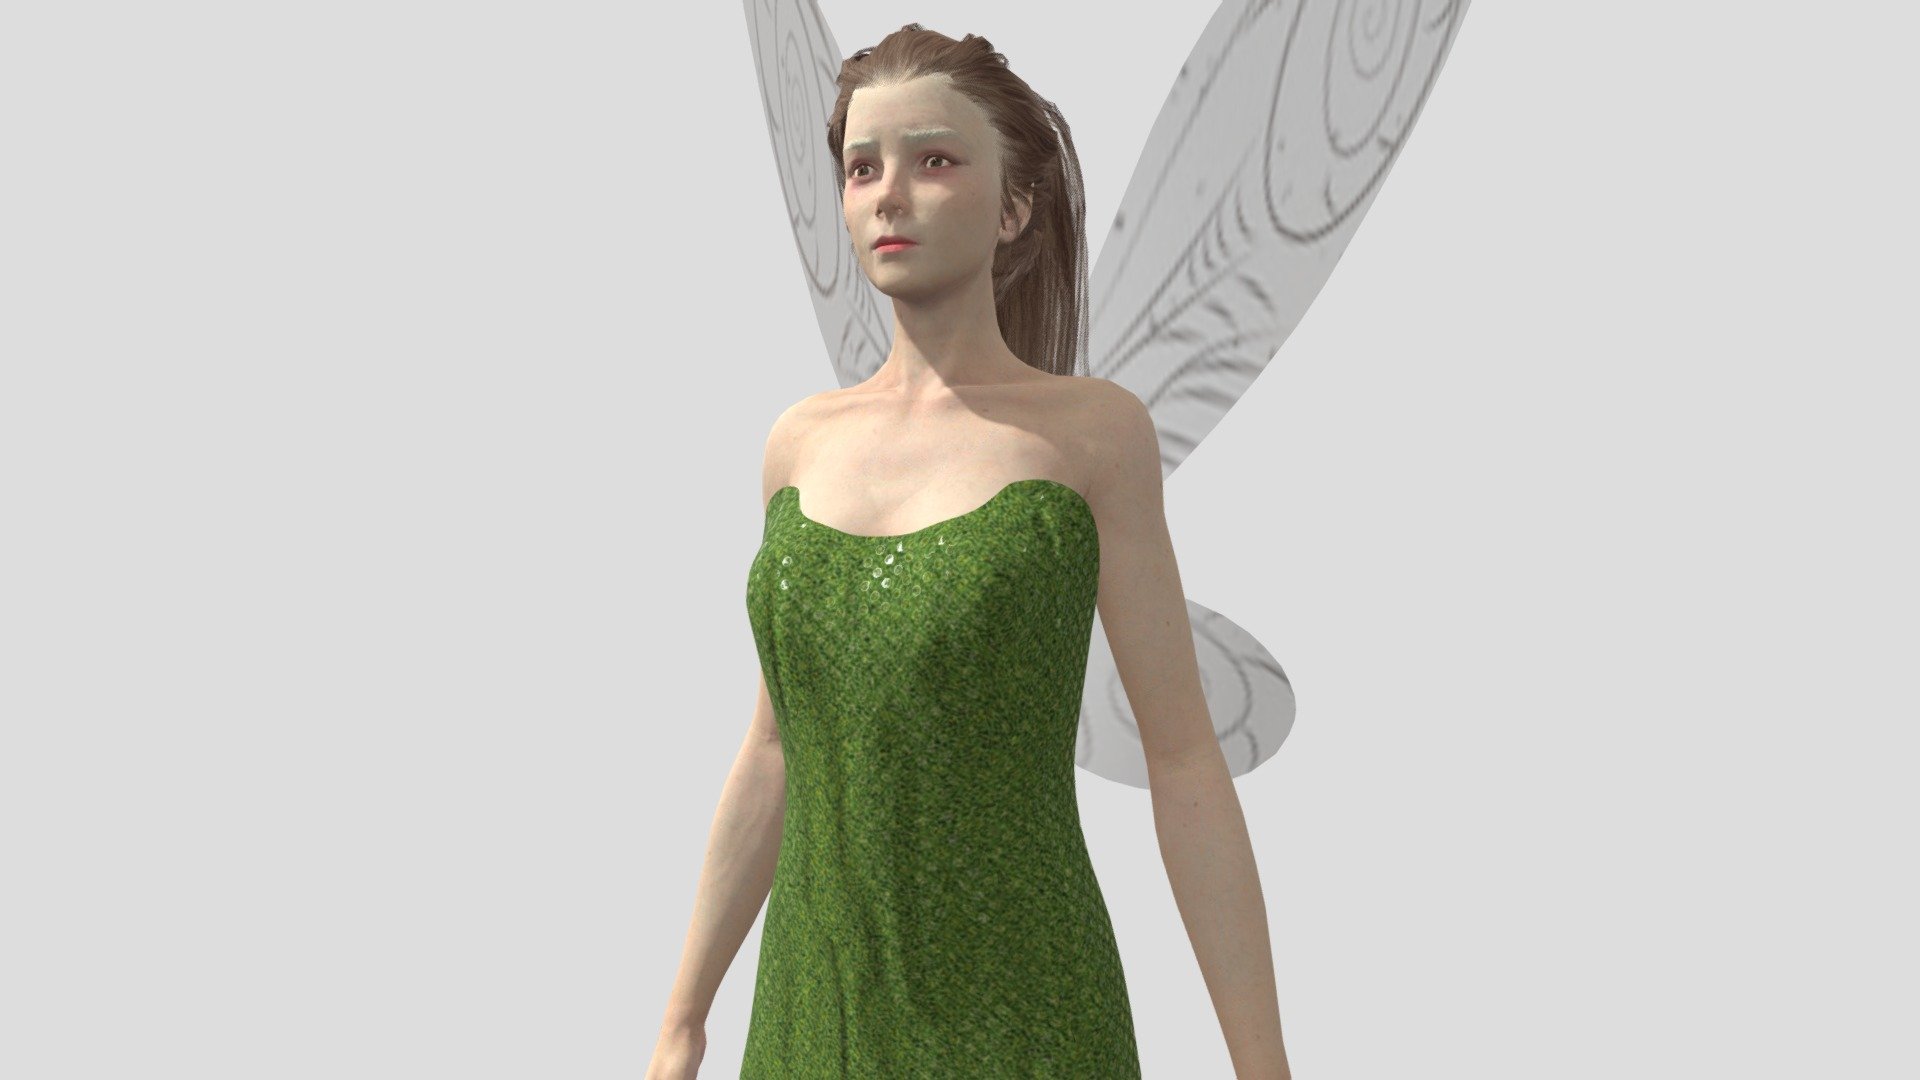 READ THE DESCRIPTION

This model was not created by me. It was kitbashed using these two sketchfab assets : https://skfb.ly/HpVV and https://skfb.ly/6uoZp

If you are using this in a game or something, Give credits to those two creators - Little fairy angel - Download Free 3D model by Chenuka Wijesundara (@ChenukaWijesundara) 3d model